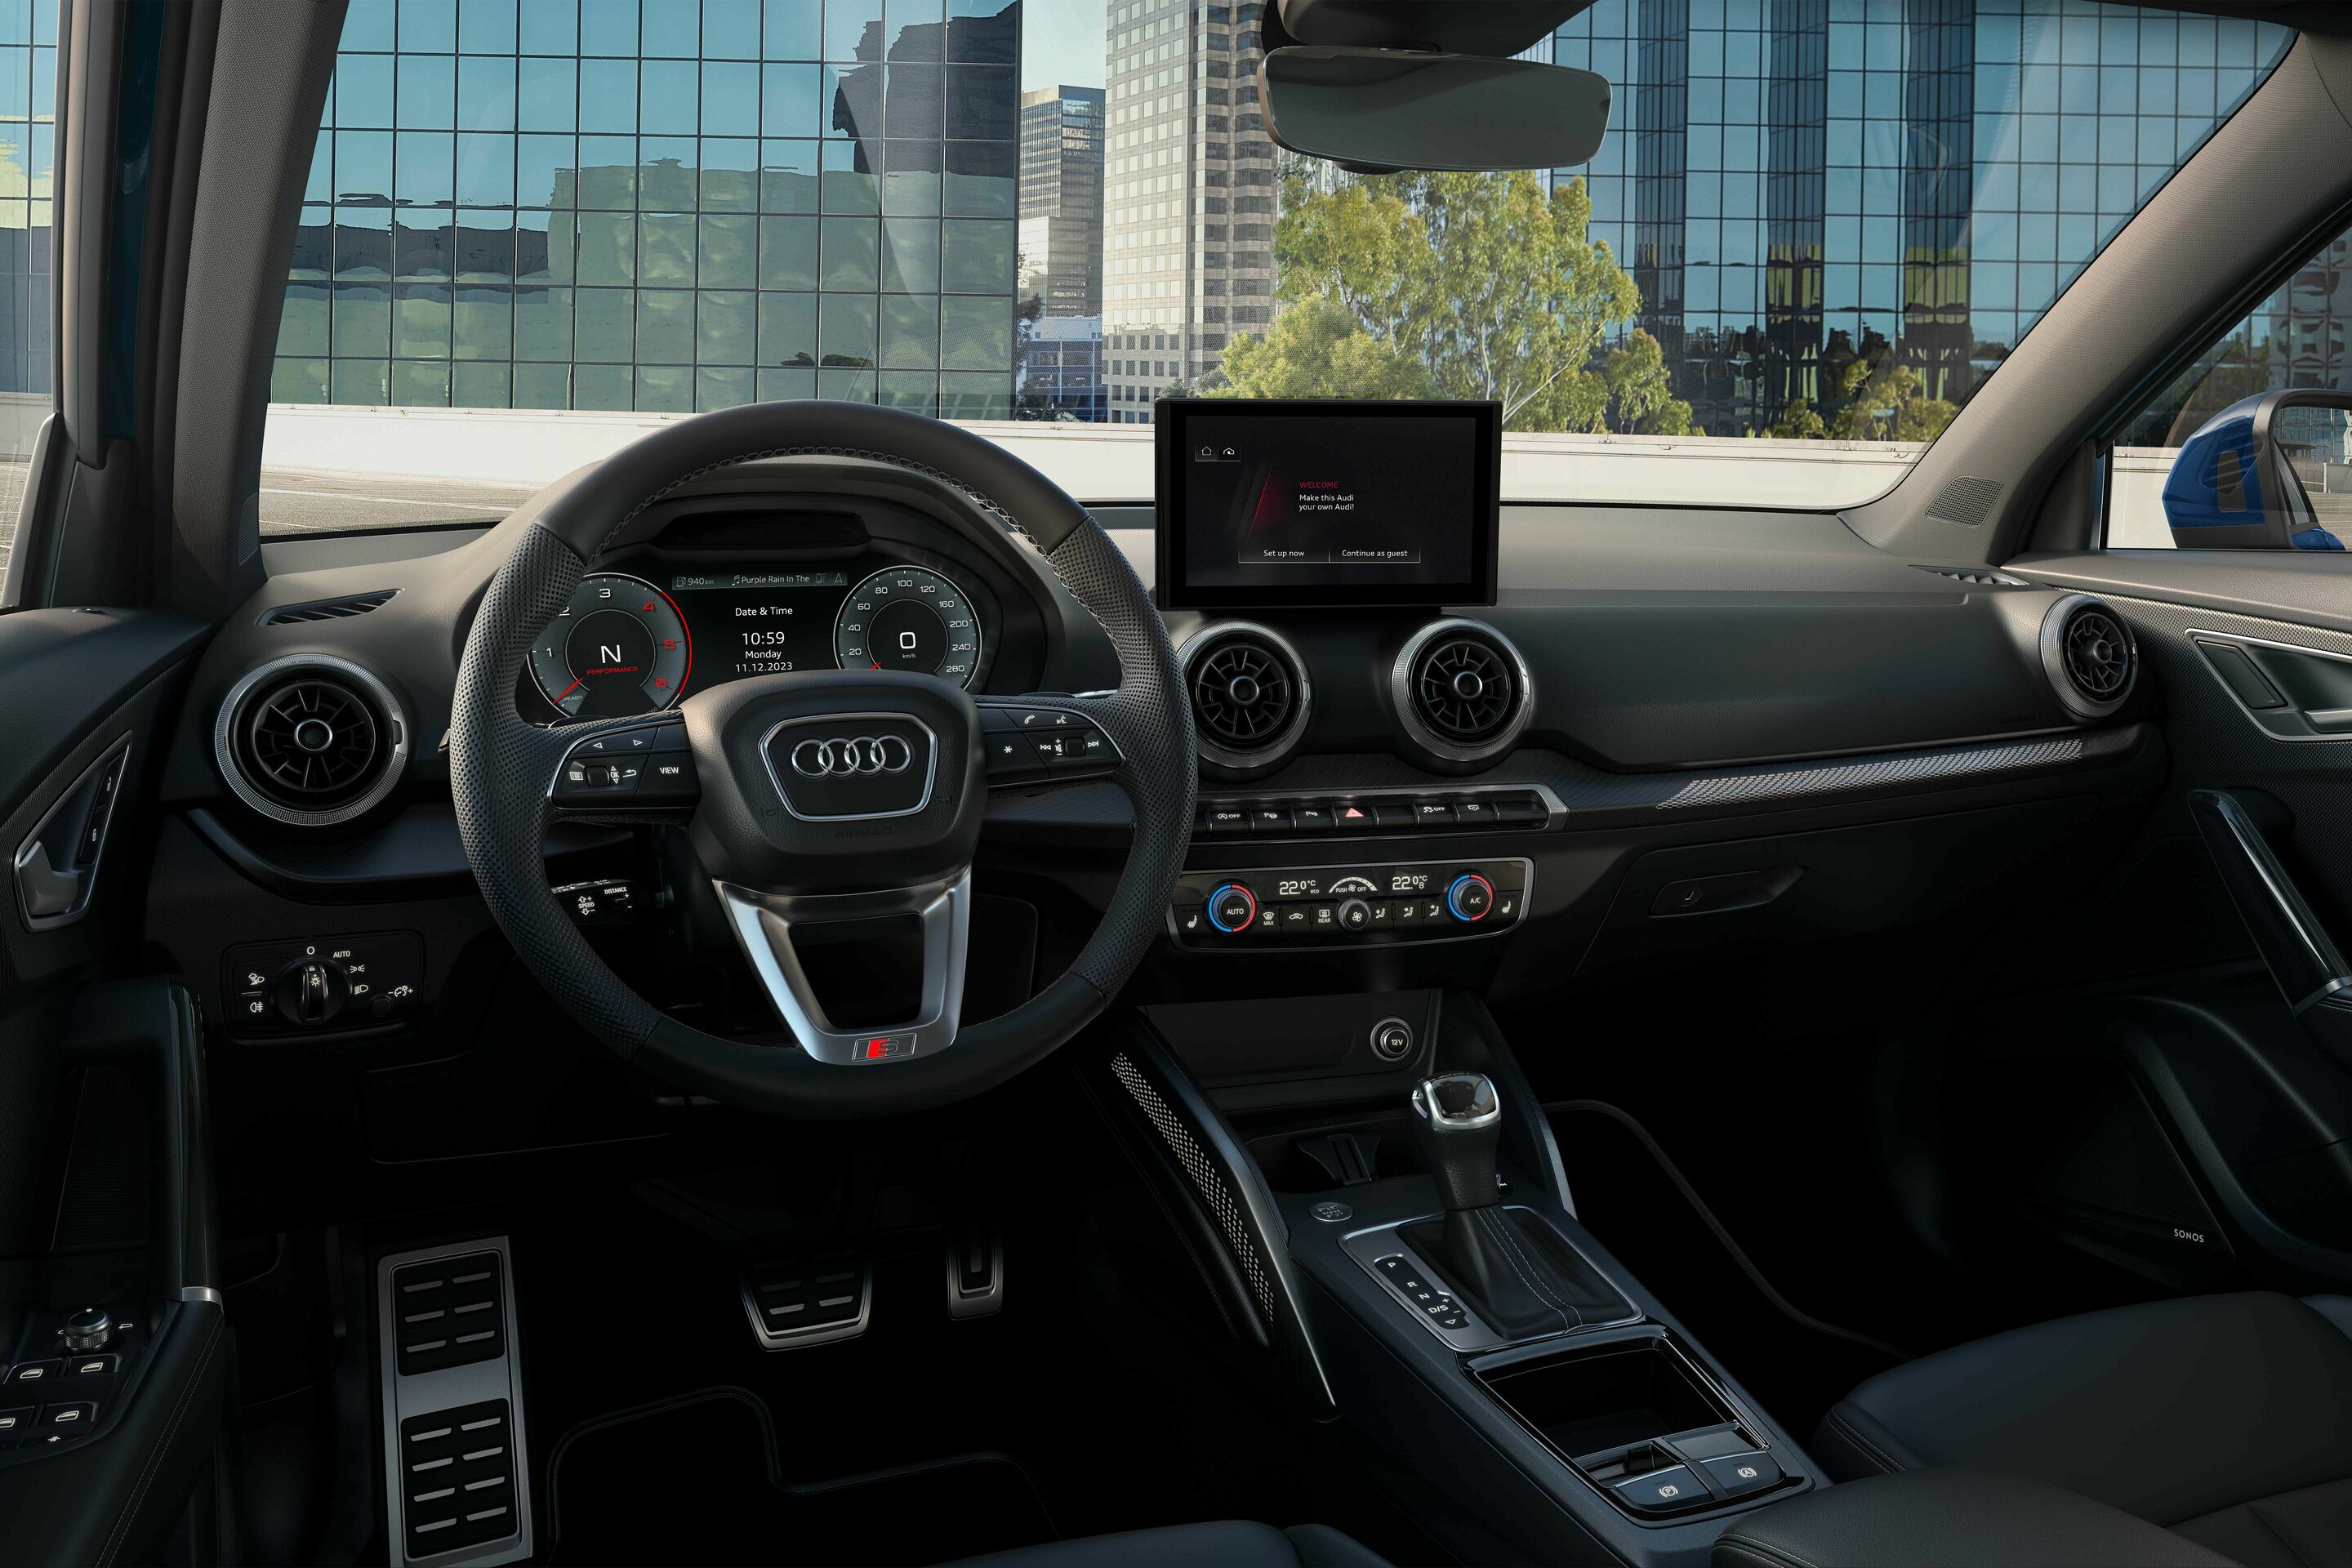 Update for the Audi Q2: New infotainment system with touchscreen and the Audi virtual cockpit